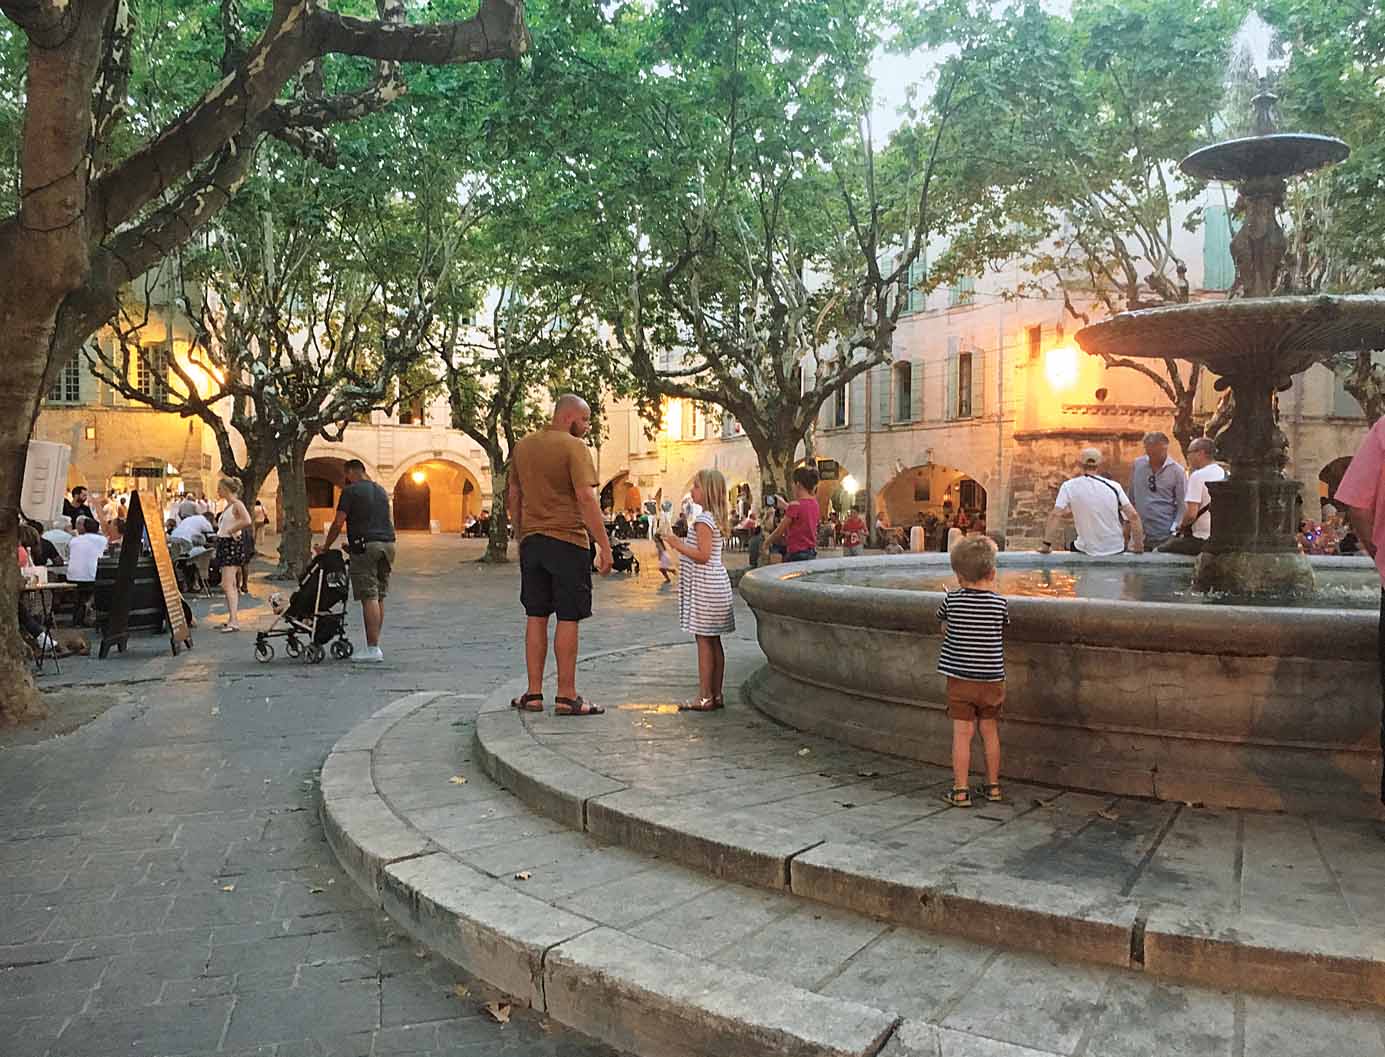 engineering-perfect-pedestrian-city-arched-spaces-central-squares-medieval-city-Uzes-France-illustrate-buildings-respond-public-space-creating-magically-human-interface